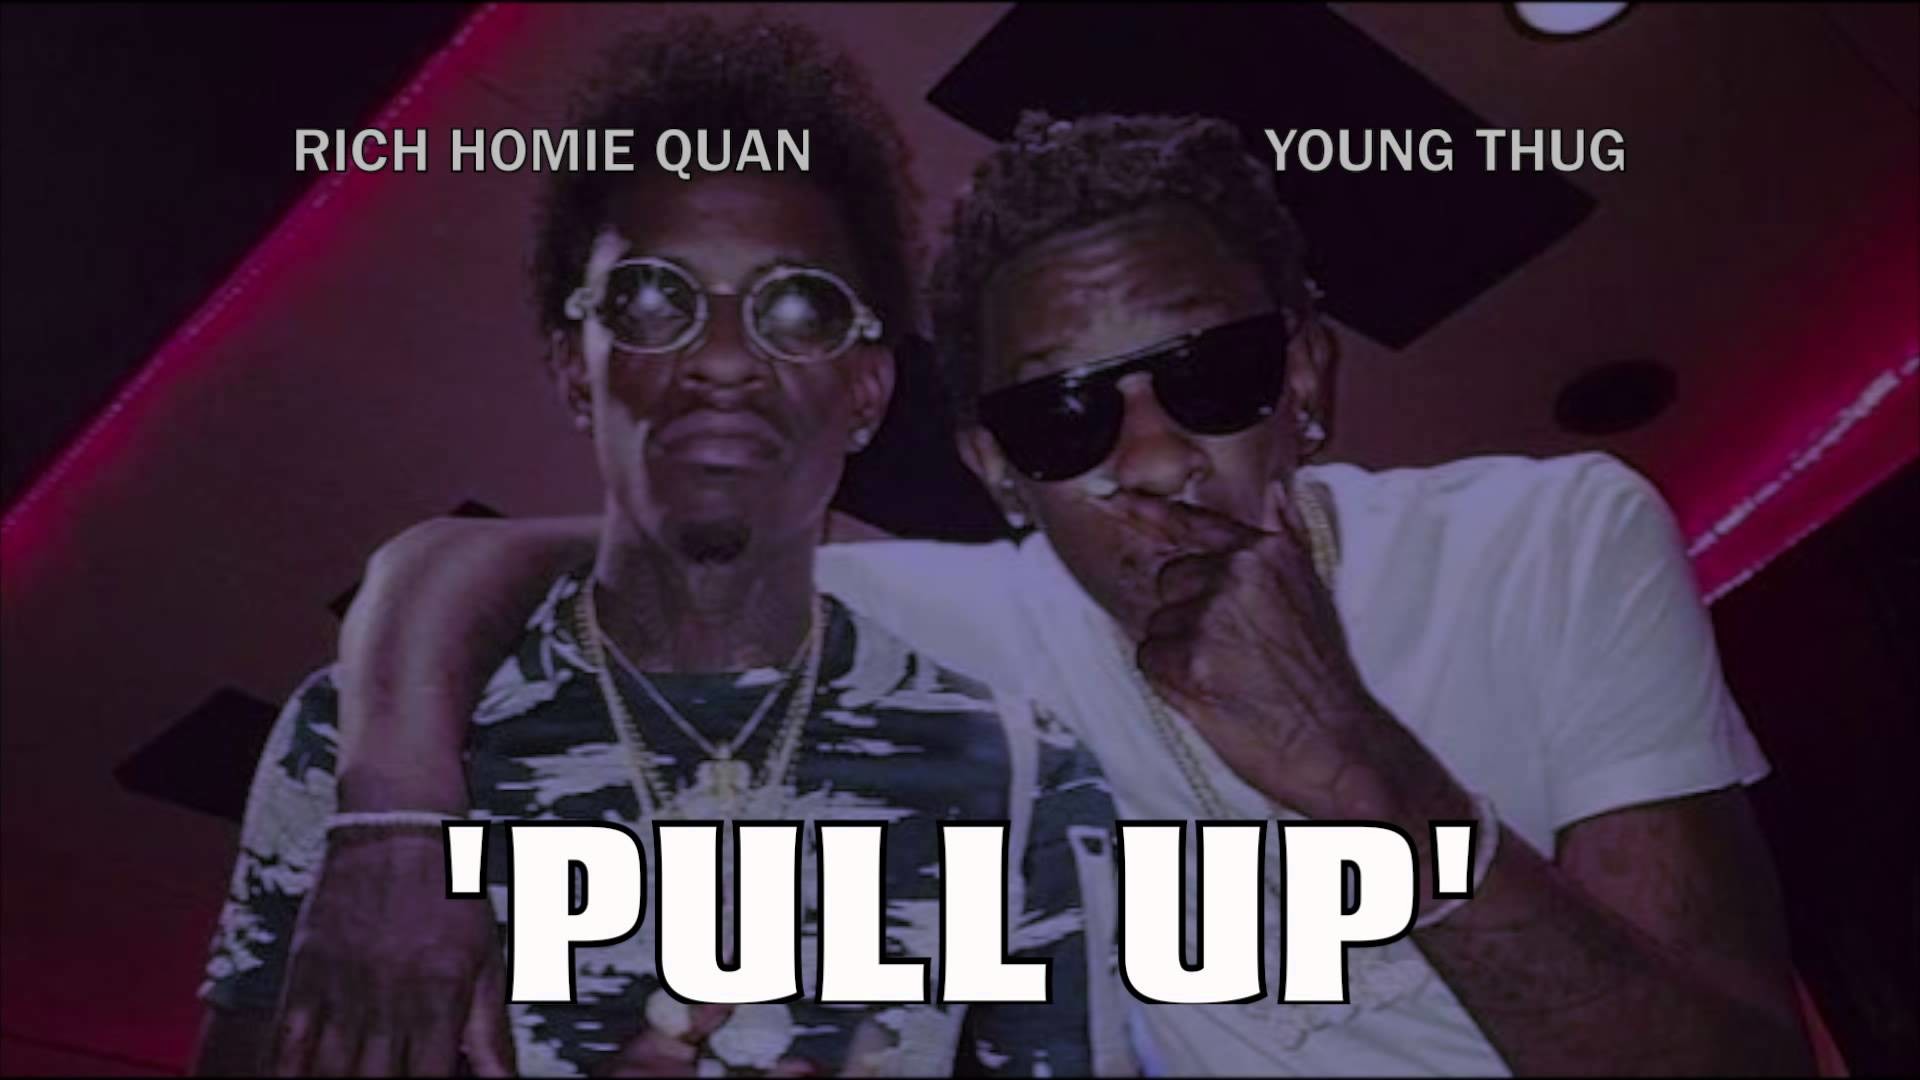 1920x1080 RICH HOMIE QUAN - PULL UP (AUDIO) - FlyHeight